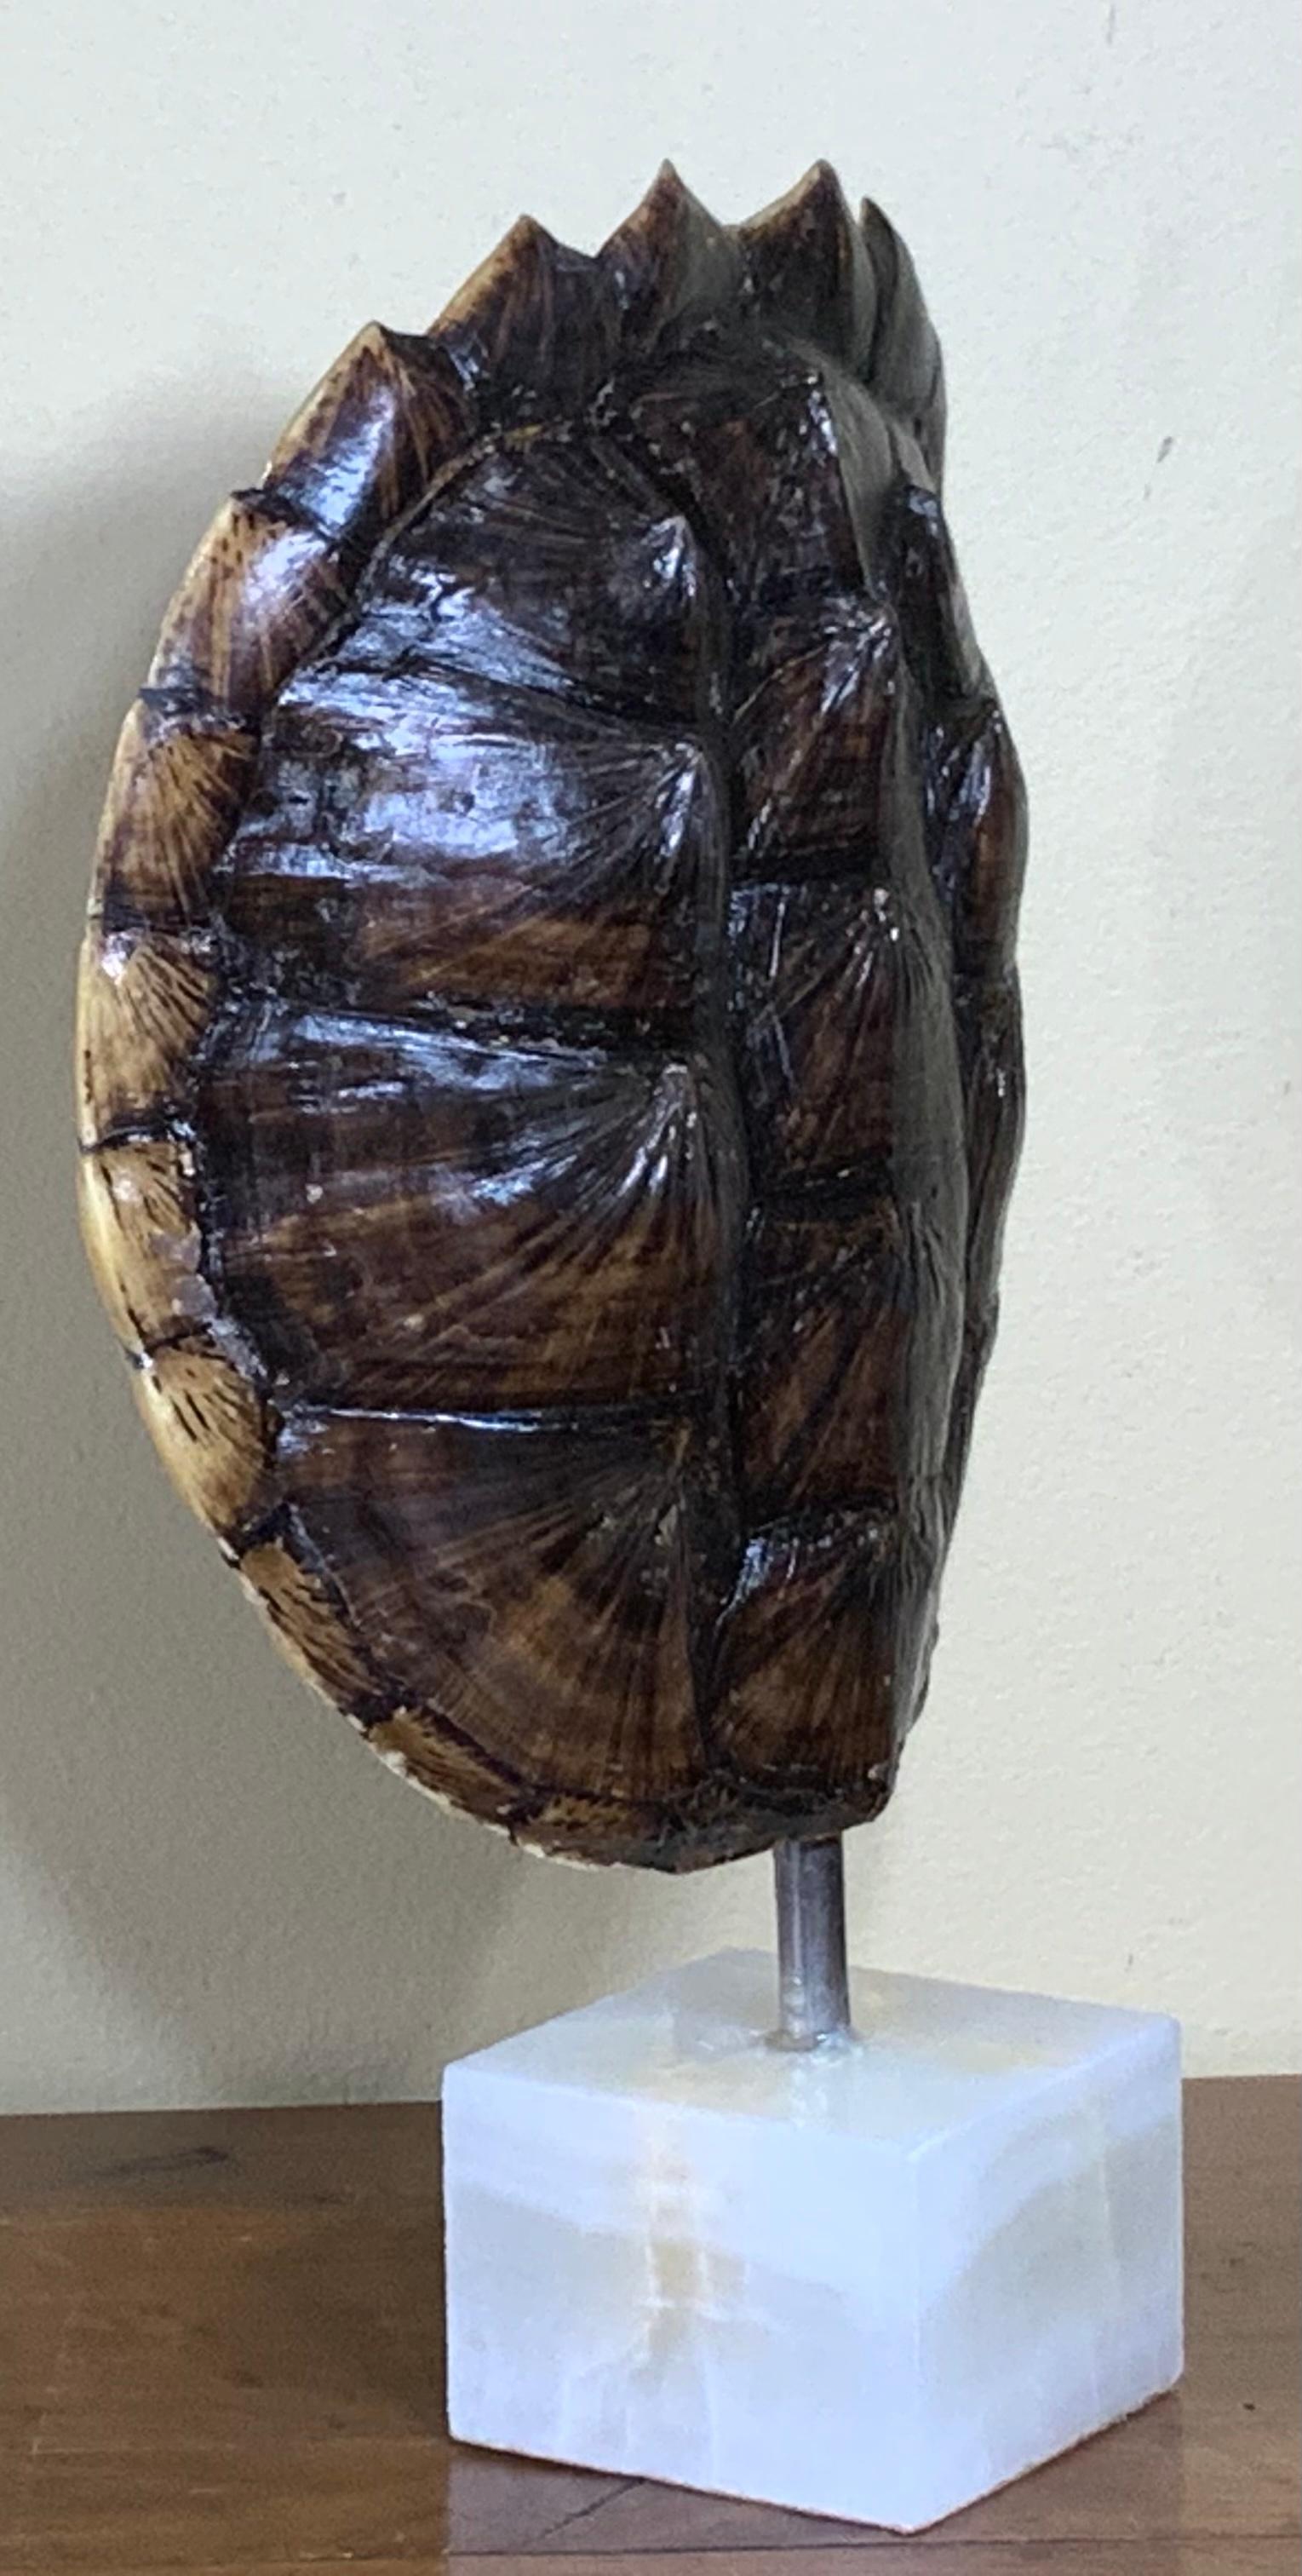 Decorative fresh water turtle shell professionally mounted on onyx base, the shell is cleaned and seal with clear protective satin finish.
And the back is upholstered with fine quality fabric. Beautiful natural piece of art for display.